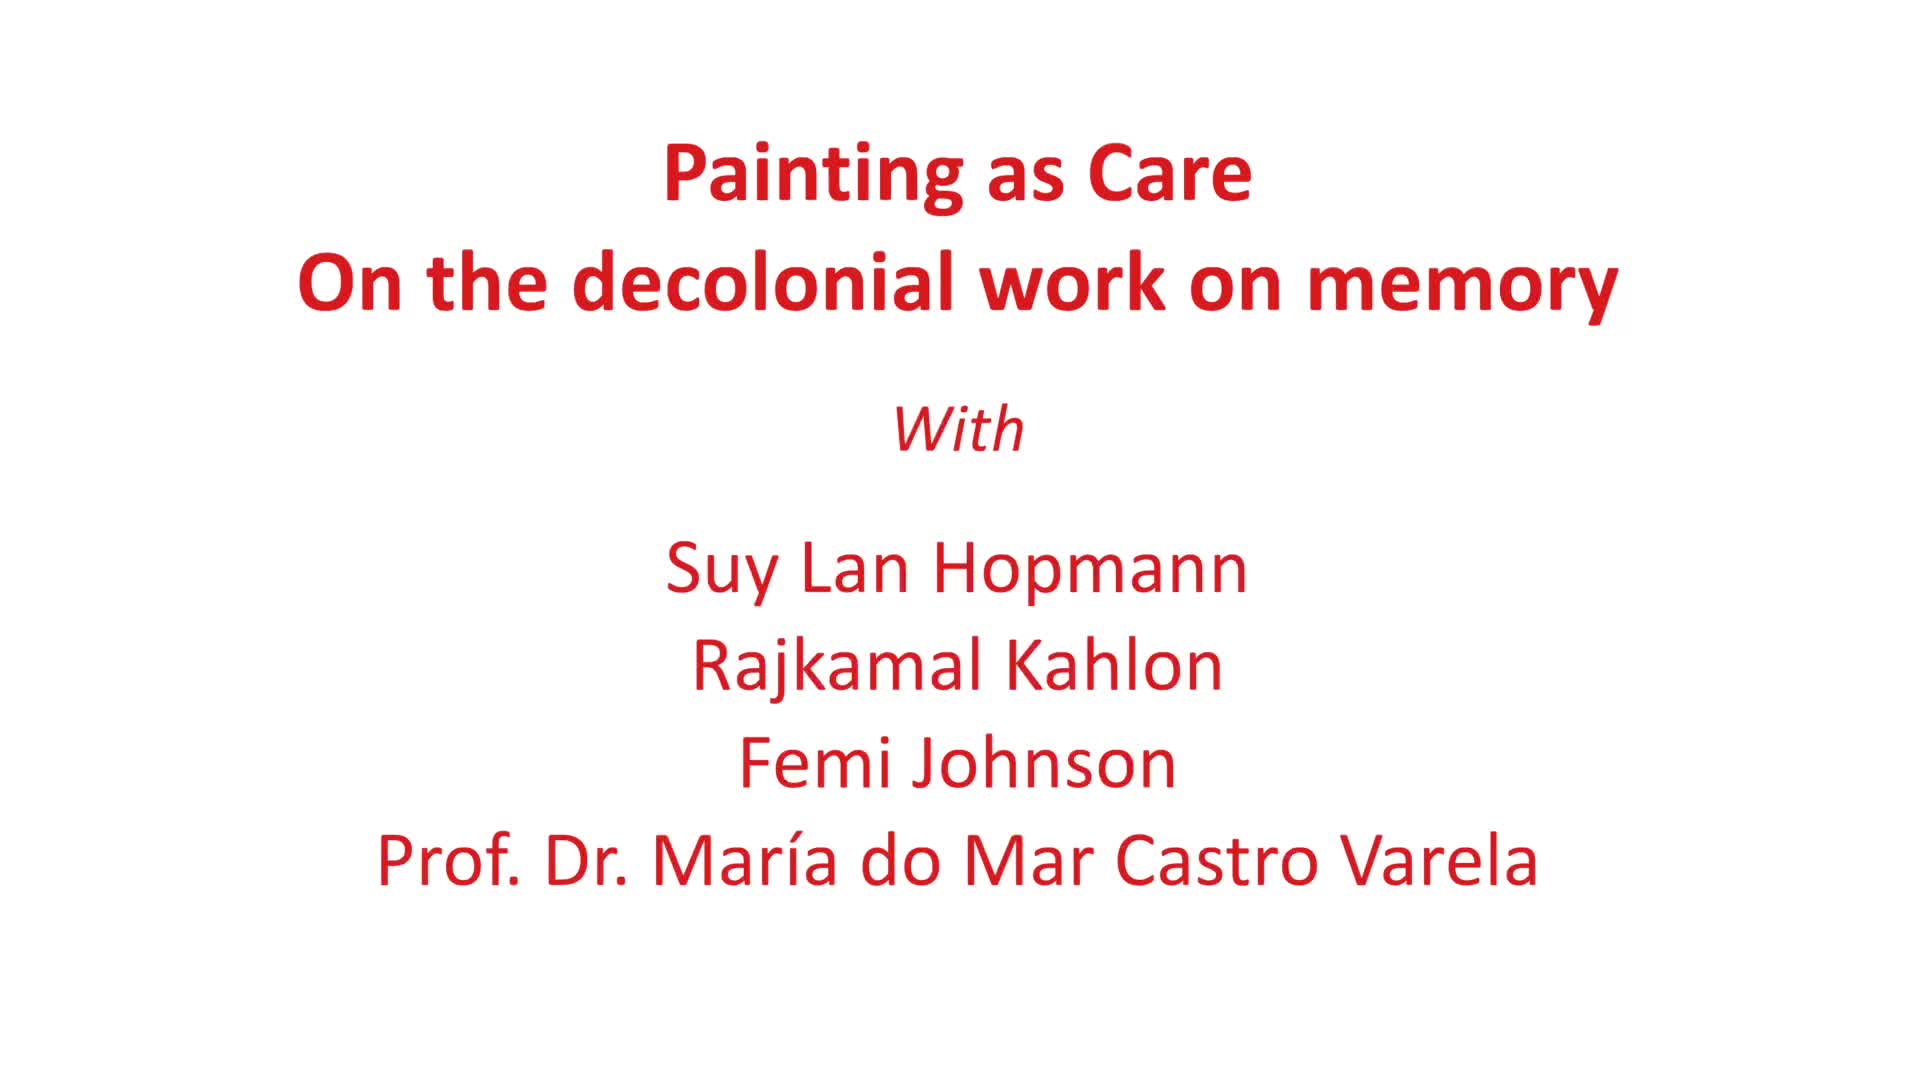 Vorschaubild - Painting as Care - On the decolonial work on memory